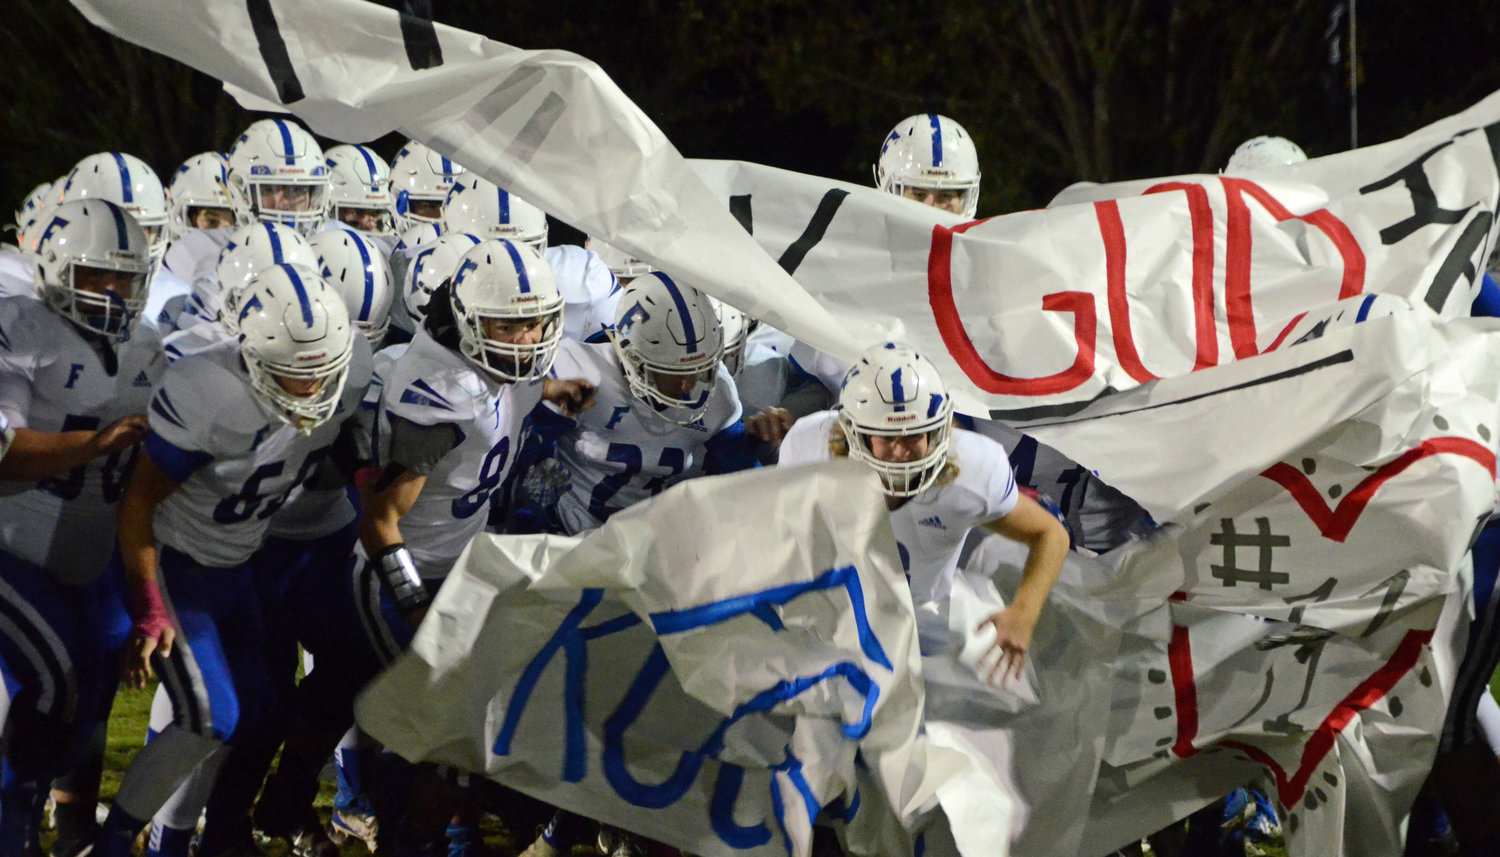 Forrest senior Hunter Pendley (center) busts through the banner first, leading the Rockets out on to the field for the Region 5-AA title tilt at Bobby M. Sharp Stadium in Hohenwald Friday night.